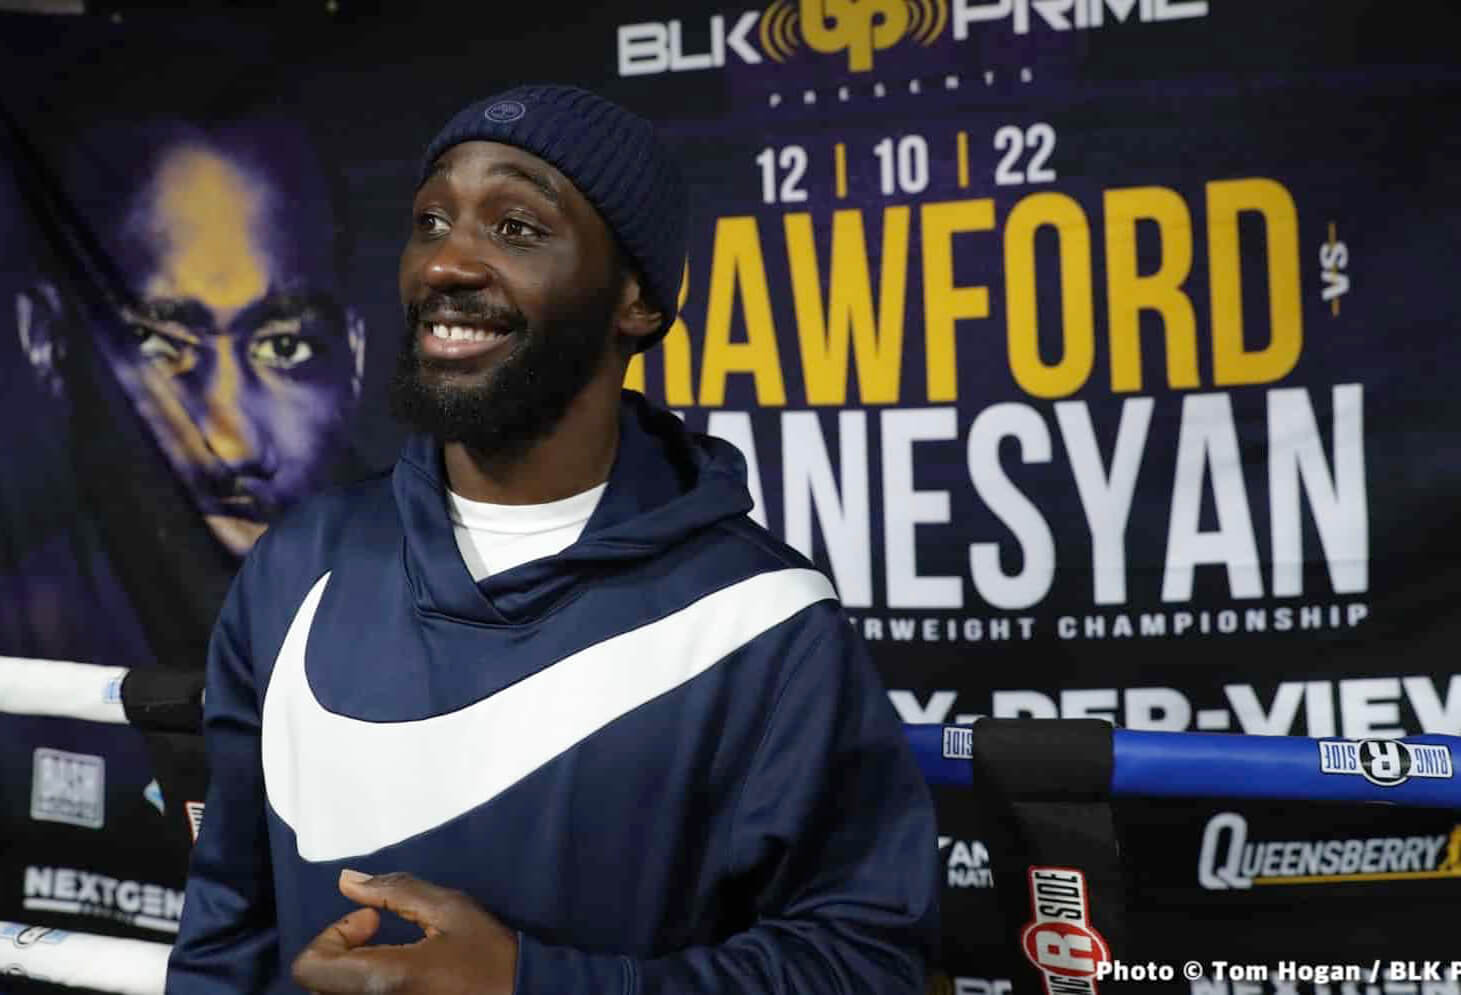 Crawford Makes Weight Prior To PPV Fight